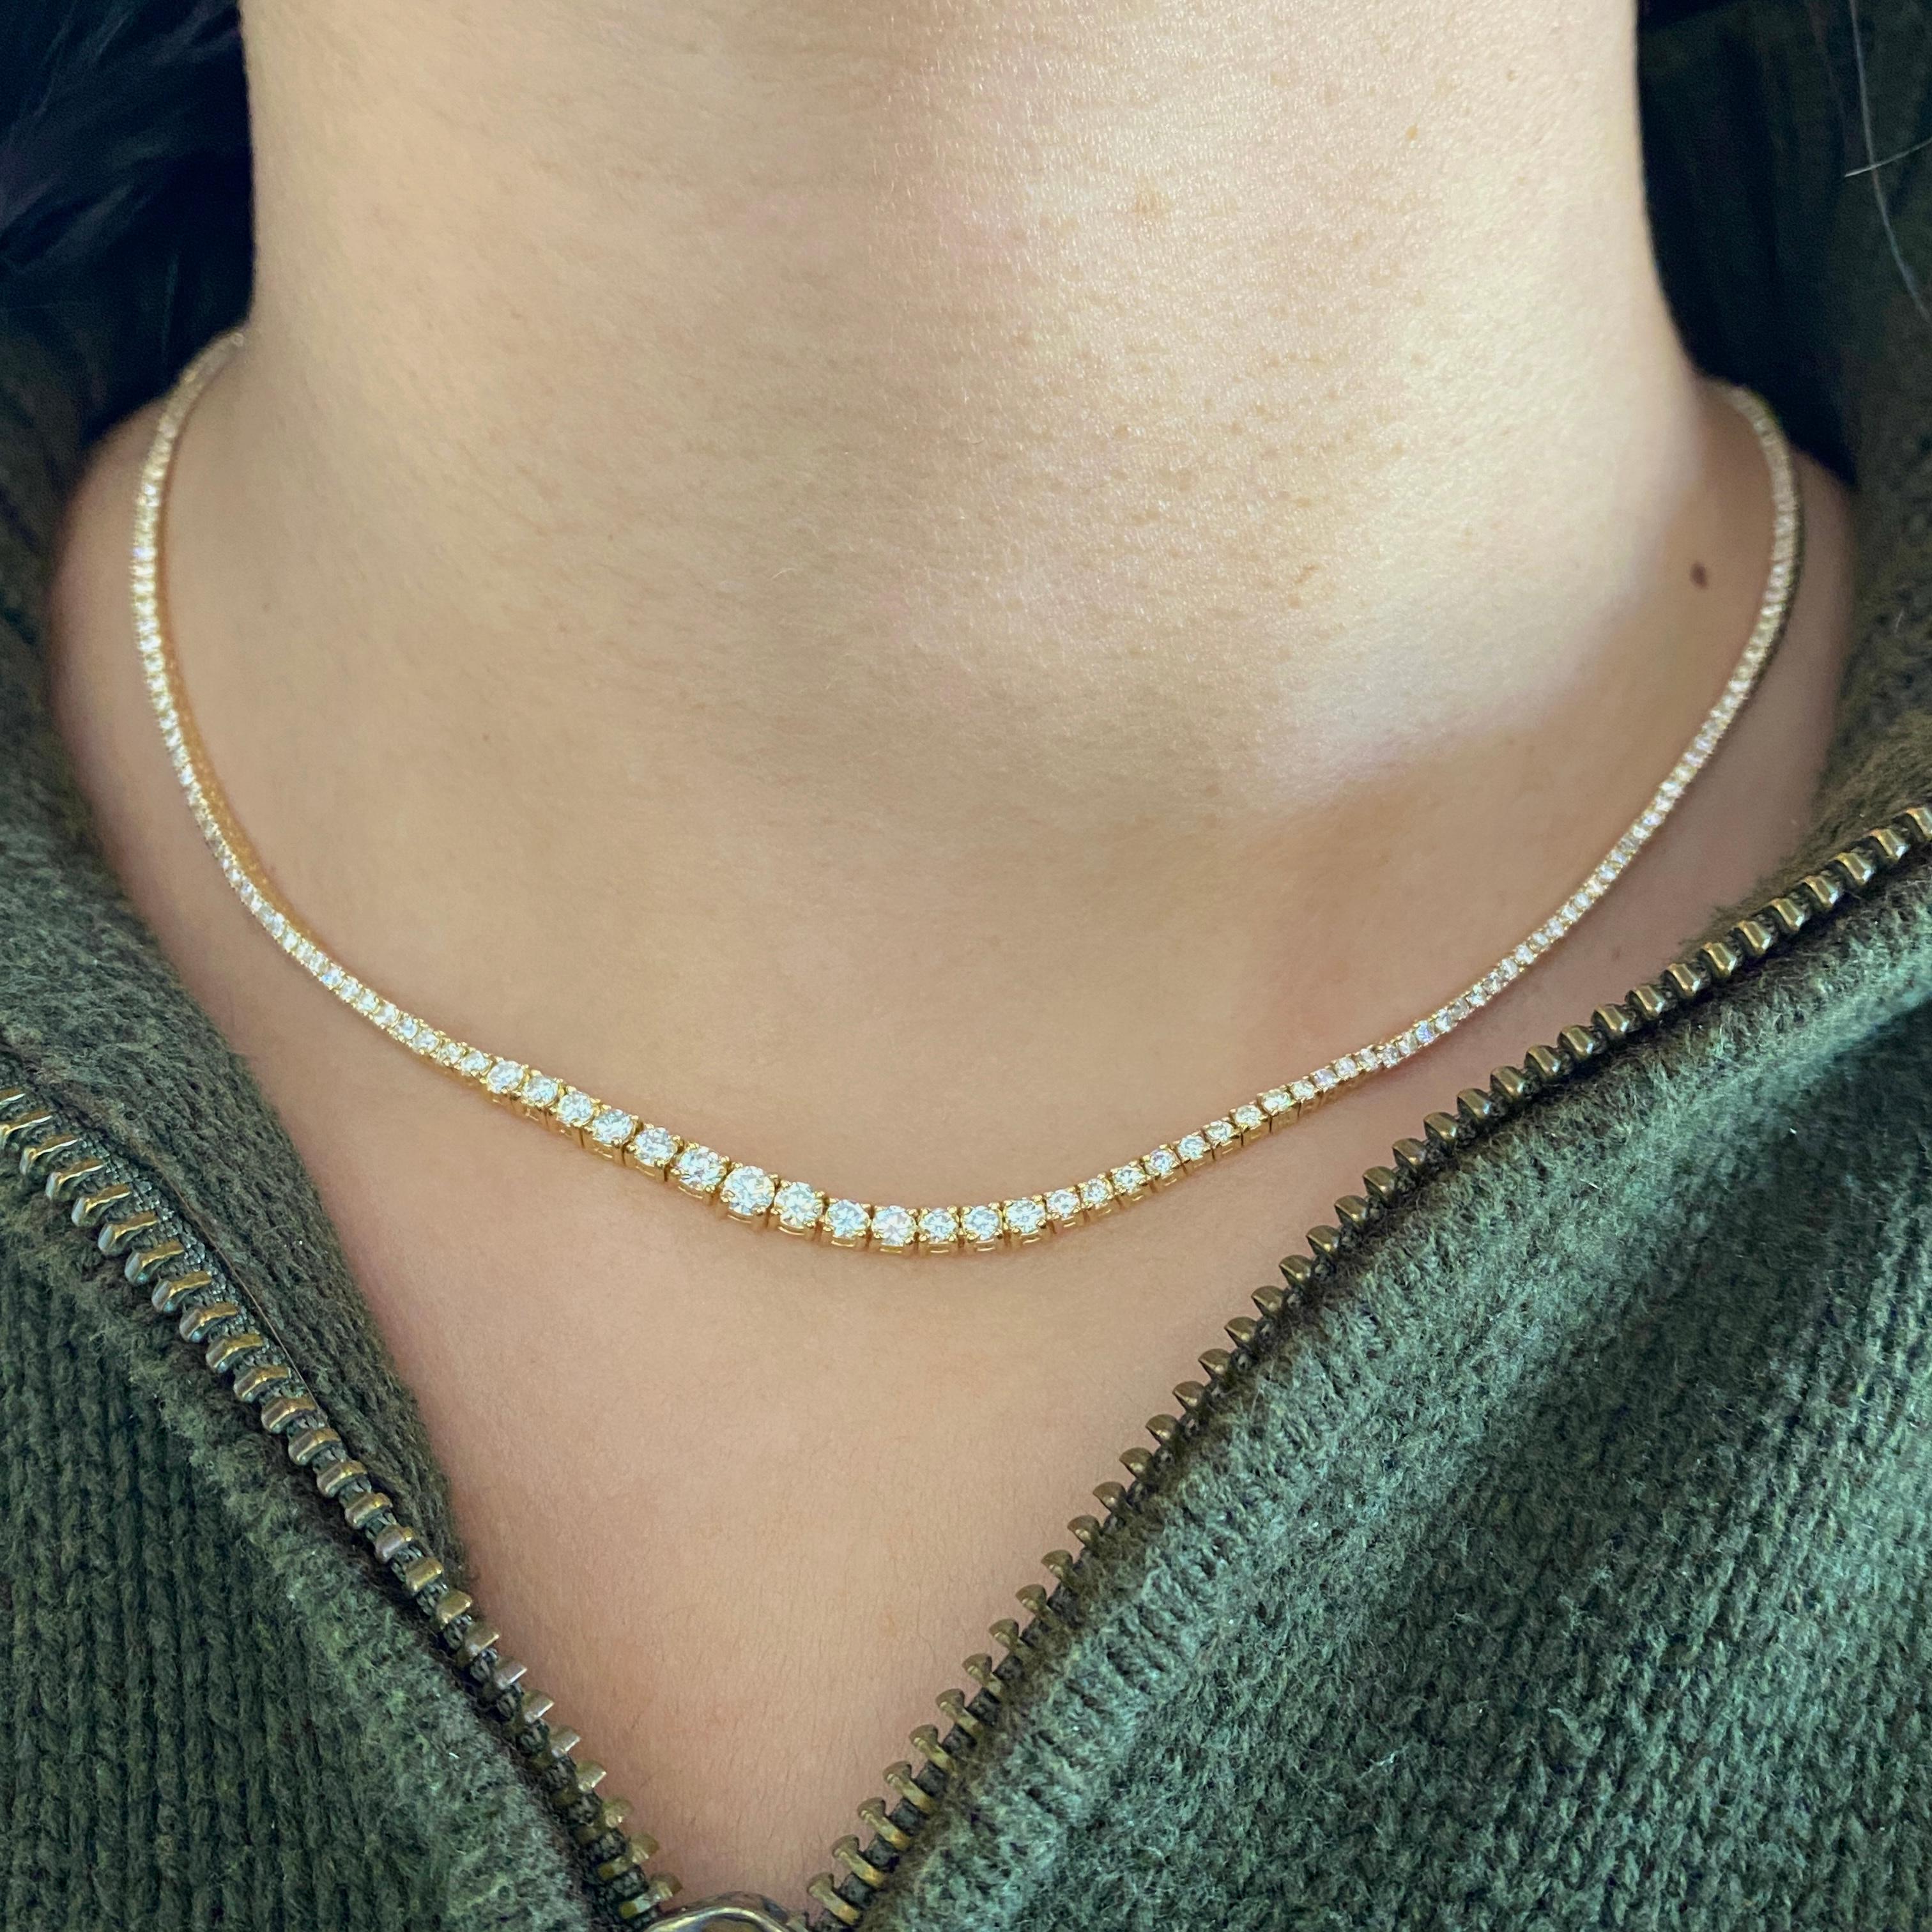 This beautiful Riviera graduated diamond tennis necklace adds grace and flair to your look any day! The diamonds weigh a total of 4 carats and have SI clarity with G-H color. Each diamond is set with four prongs and sparkle brilliantly! The diamonds